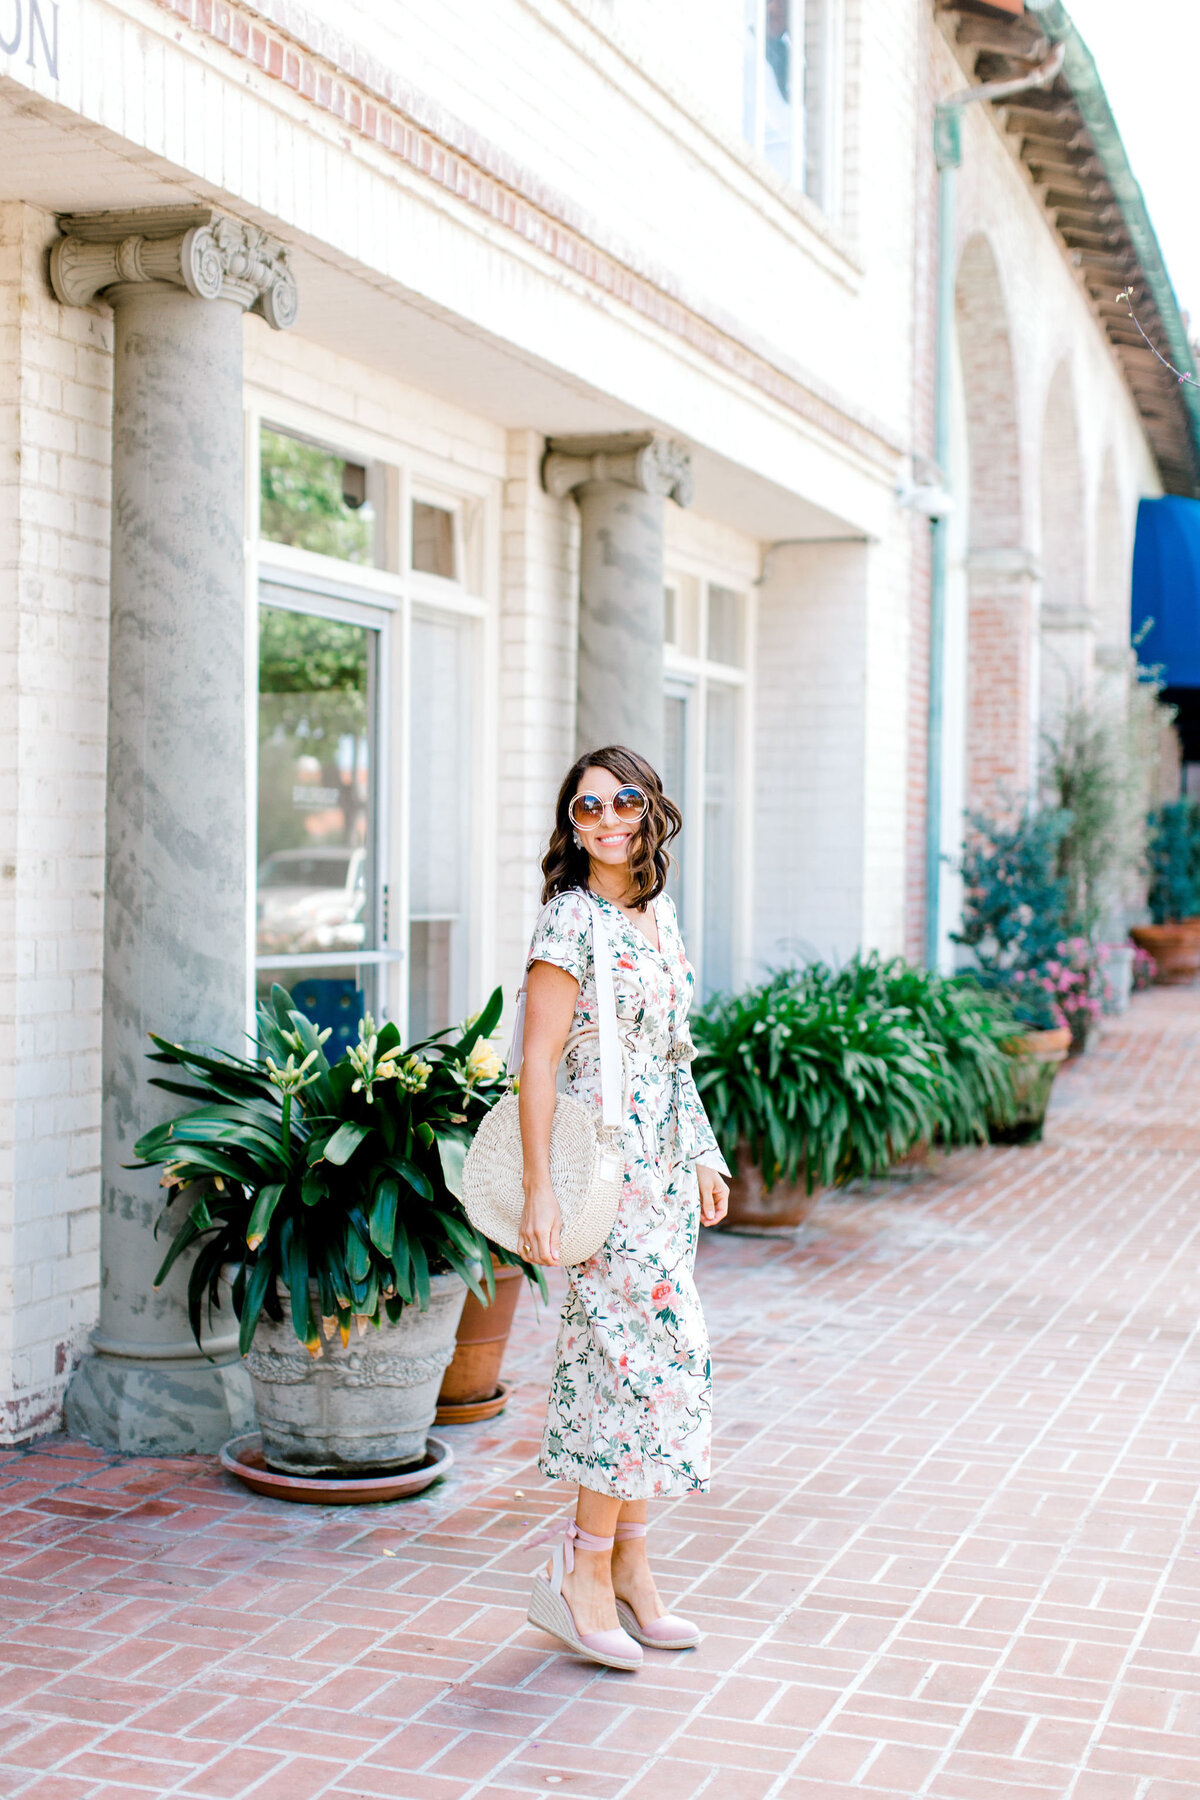 Fashion and Lifestyle Blogger Photographer | Angelica Marie Photography | Based in LA and Dallas